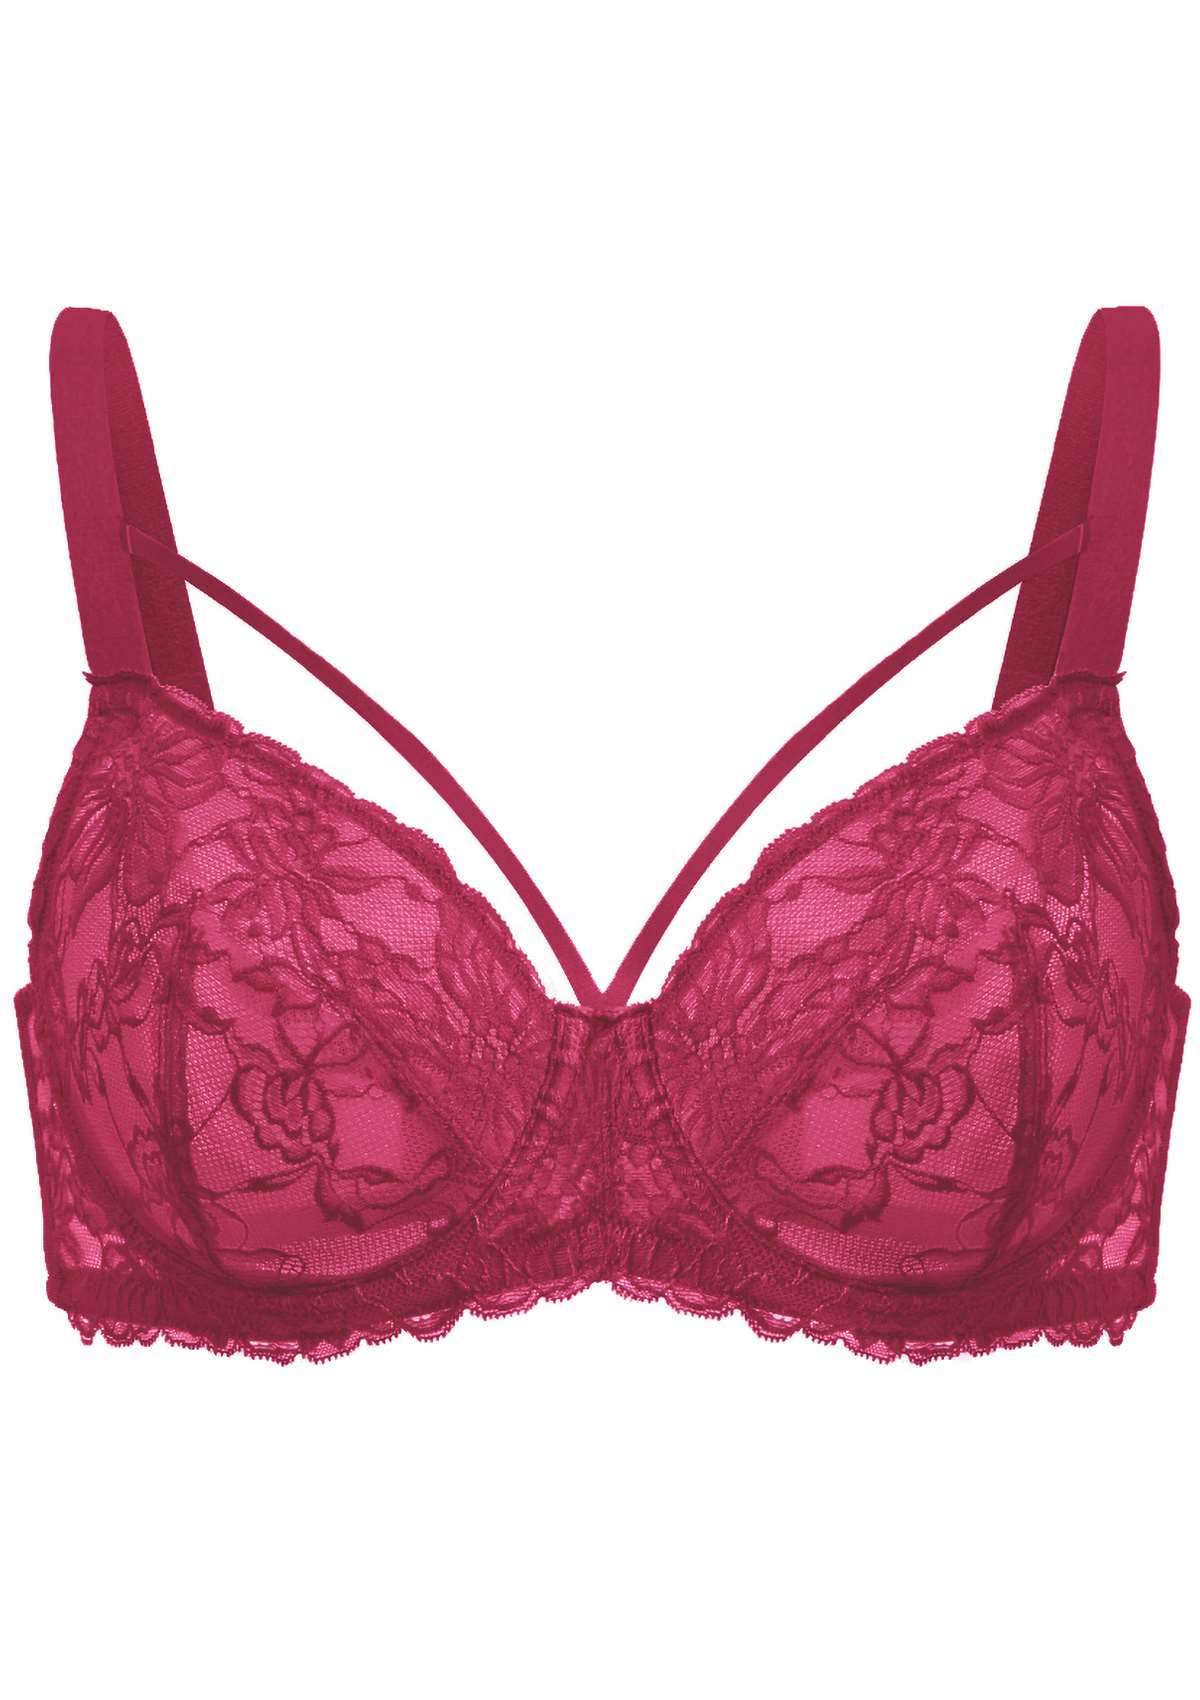 HSIA Pretty In Petals Sexy Lace Bra: Full Coverage Back Smoothing Bra - Red / 40 / I